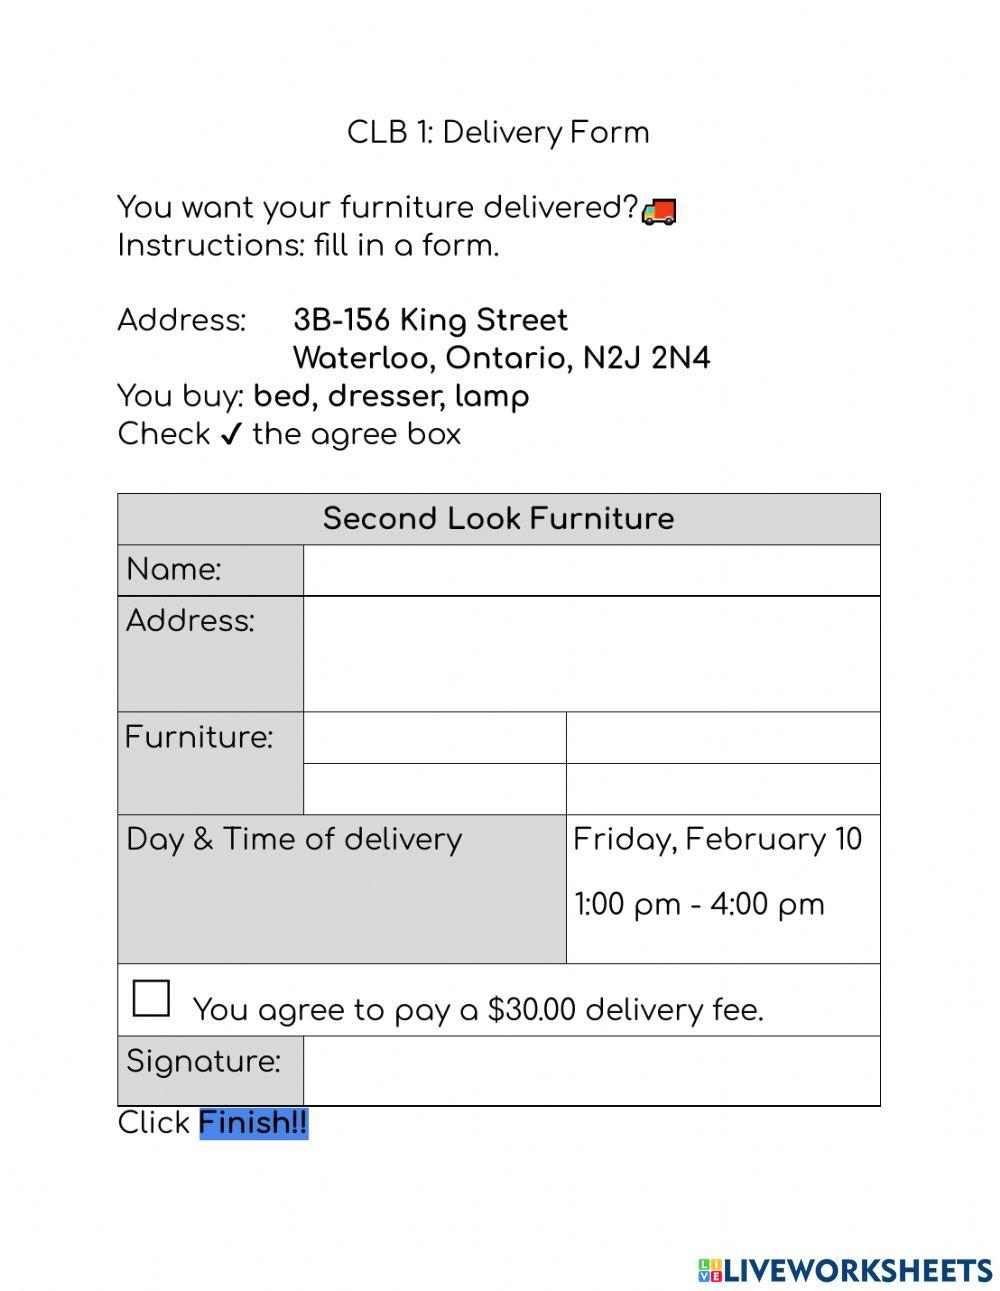 CLB 1: Furniture Delivery Form 2